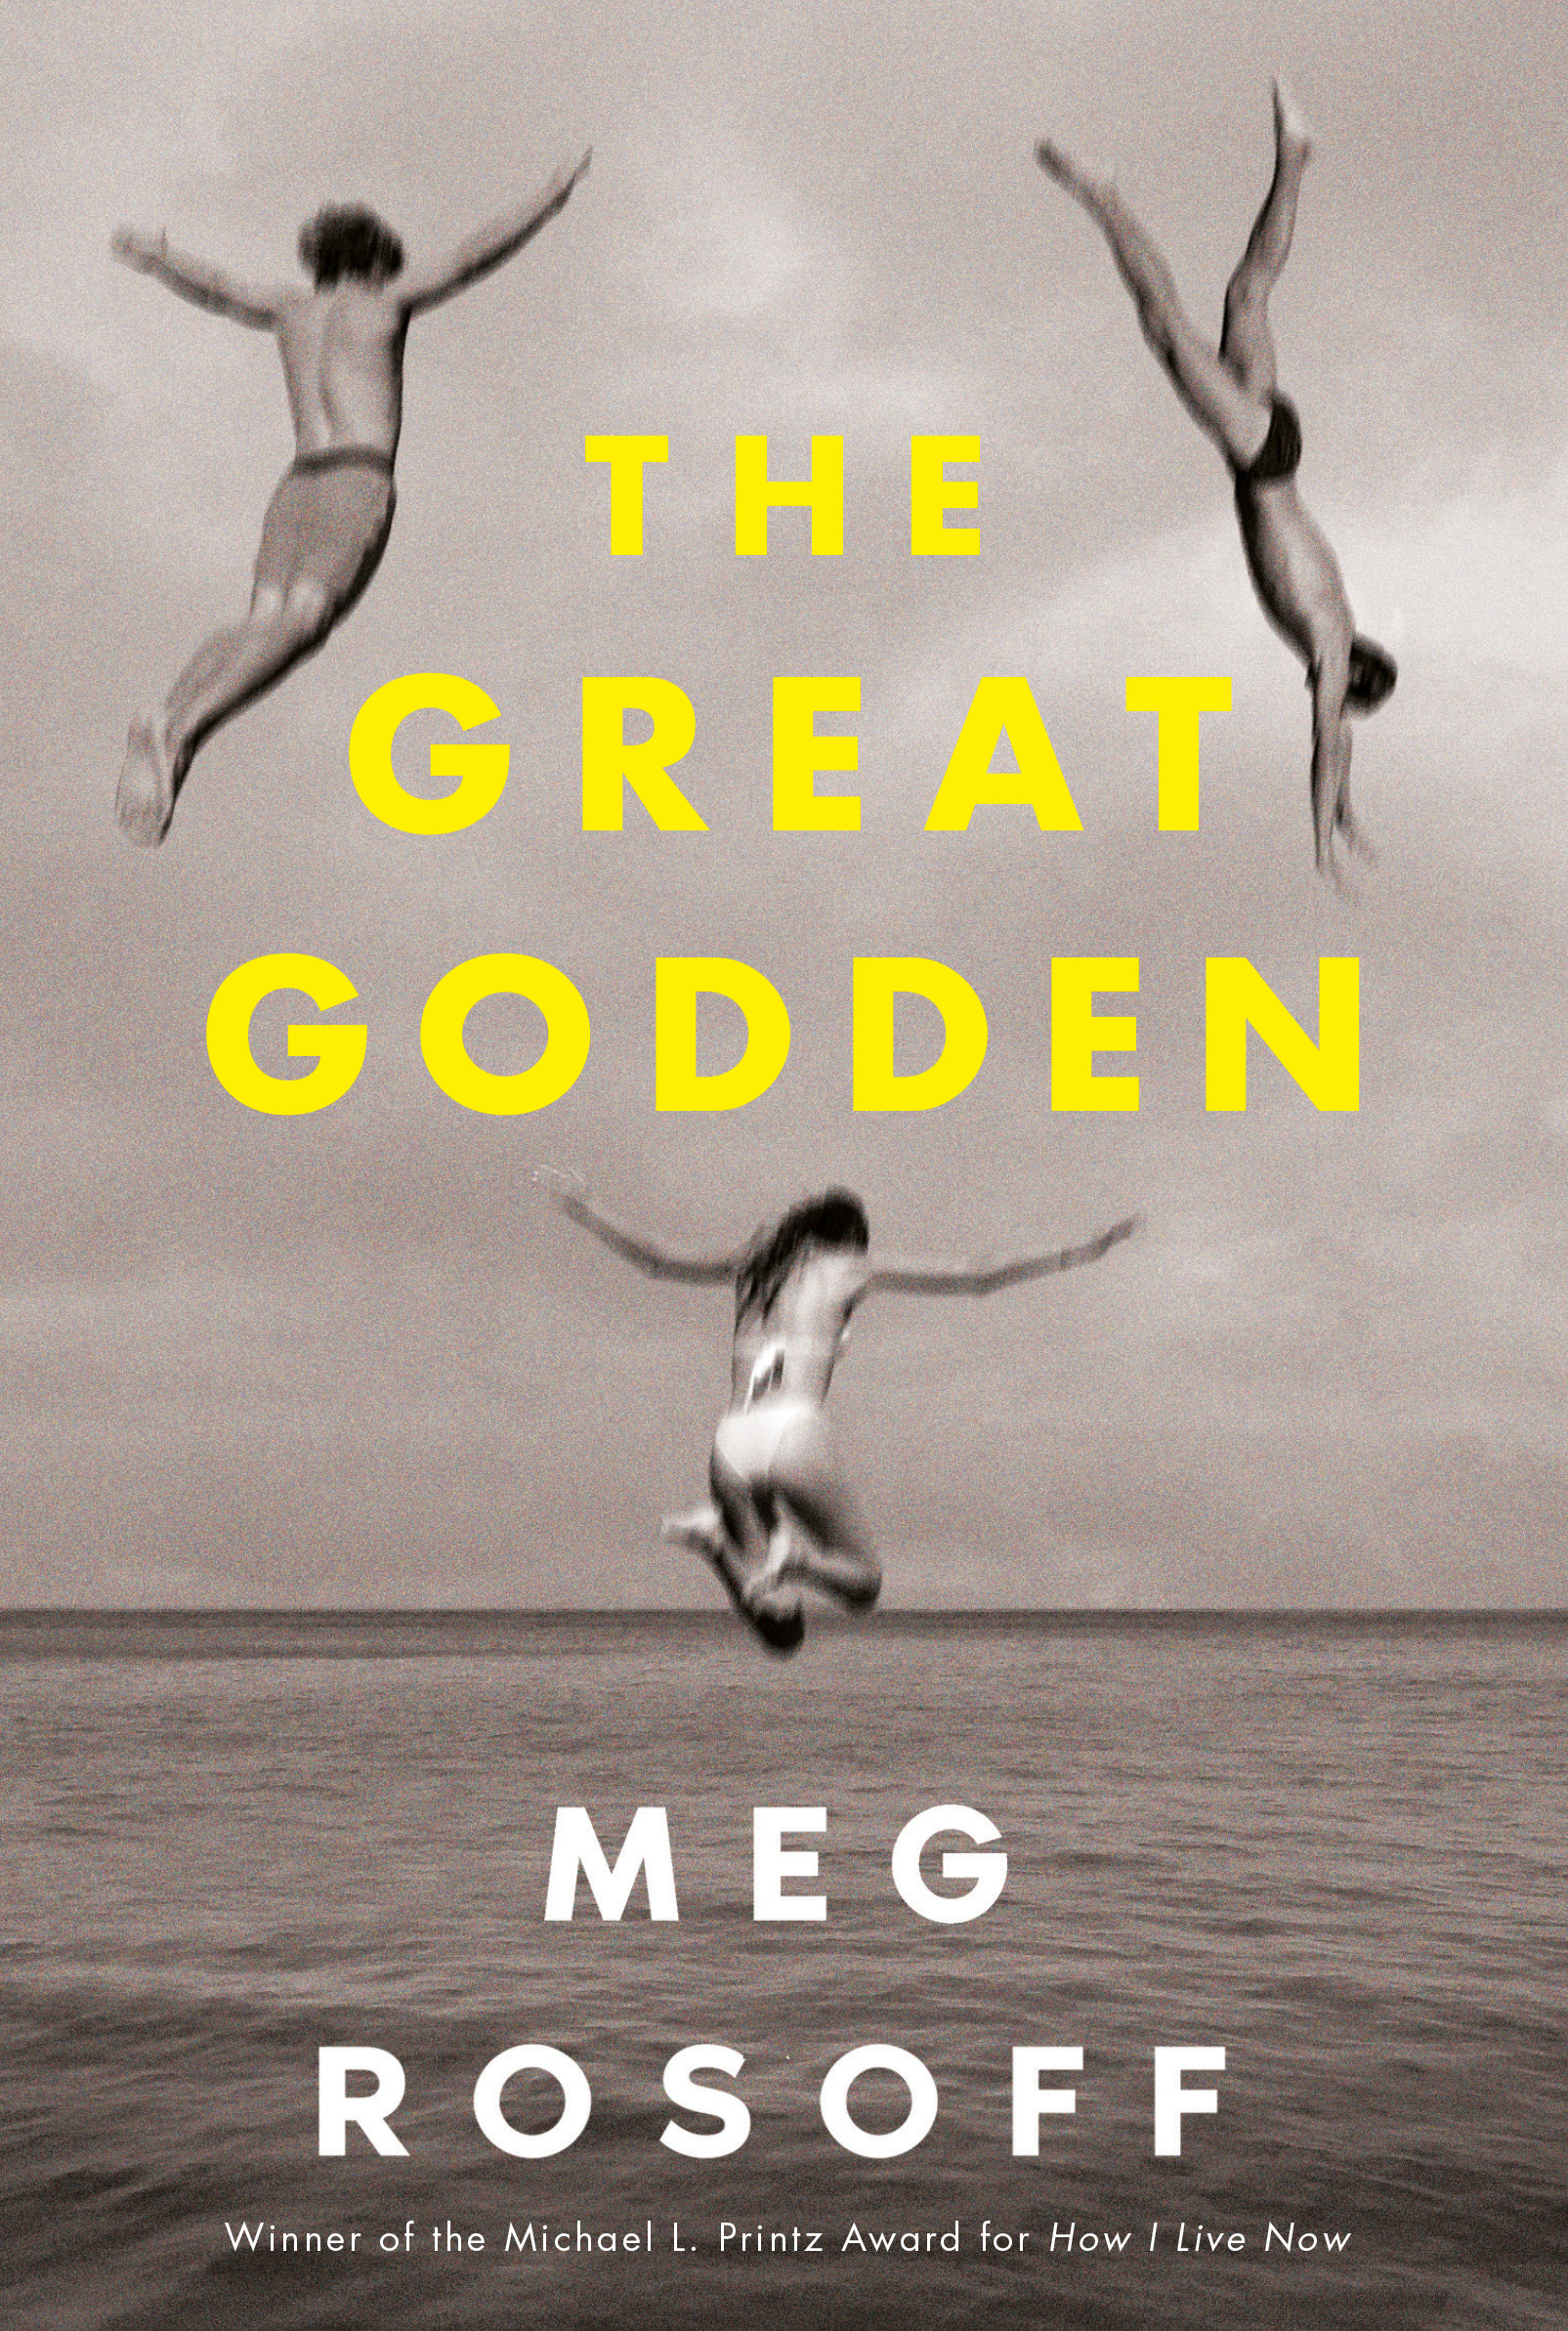 The Great Godden book cover